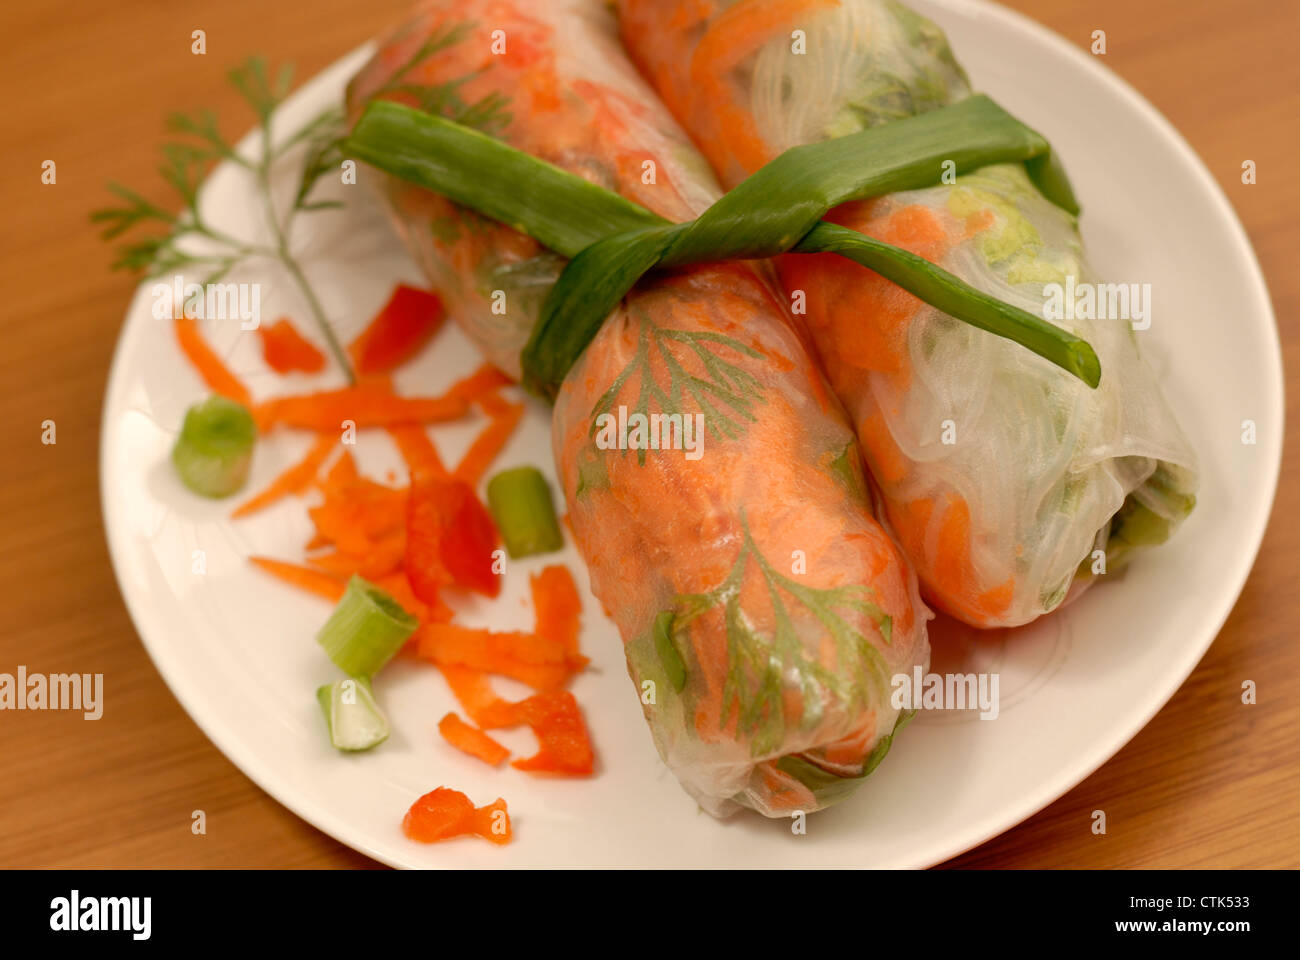 Vietnamese style Spring Rolls, garnished and tied together with a green onion. Vegetarian and Vegan appetizer. Stock Photo